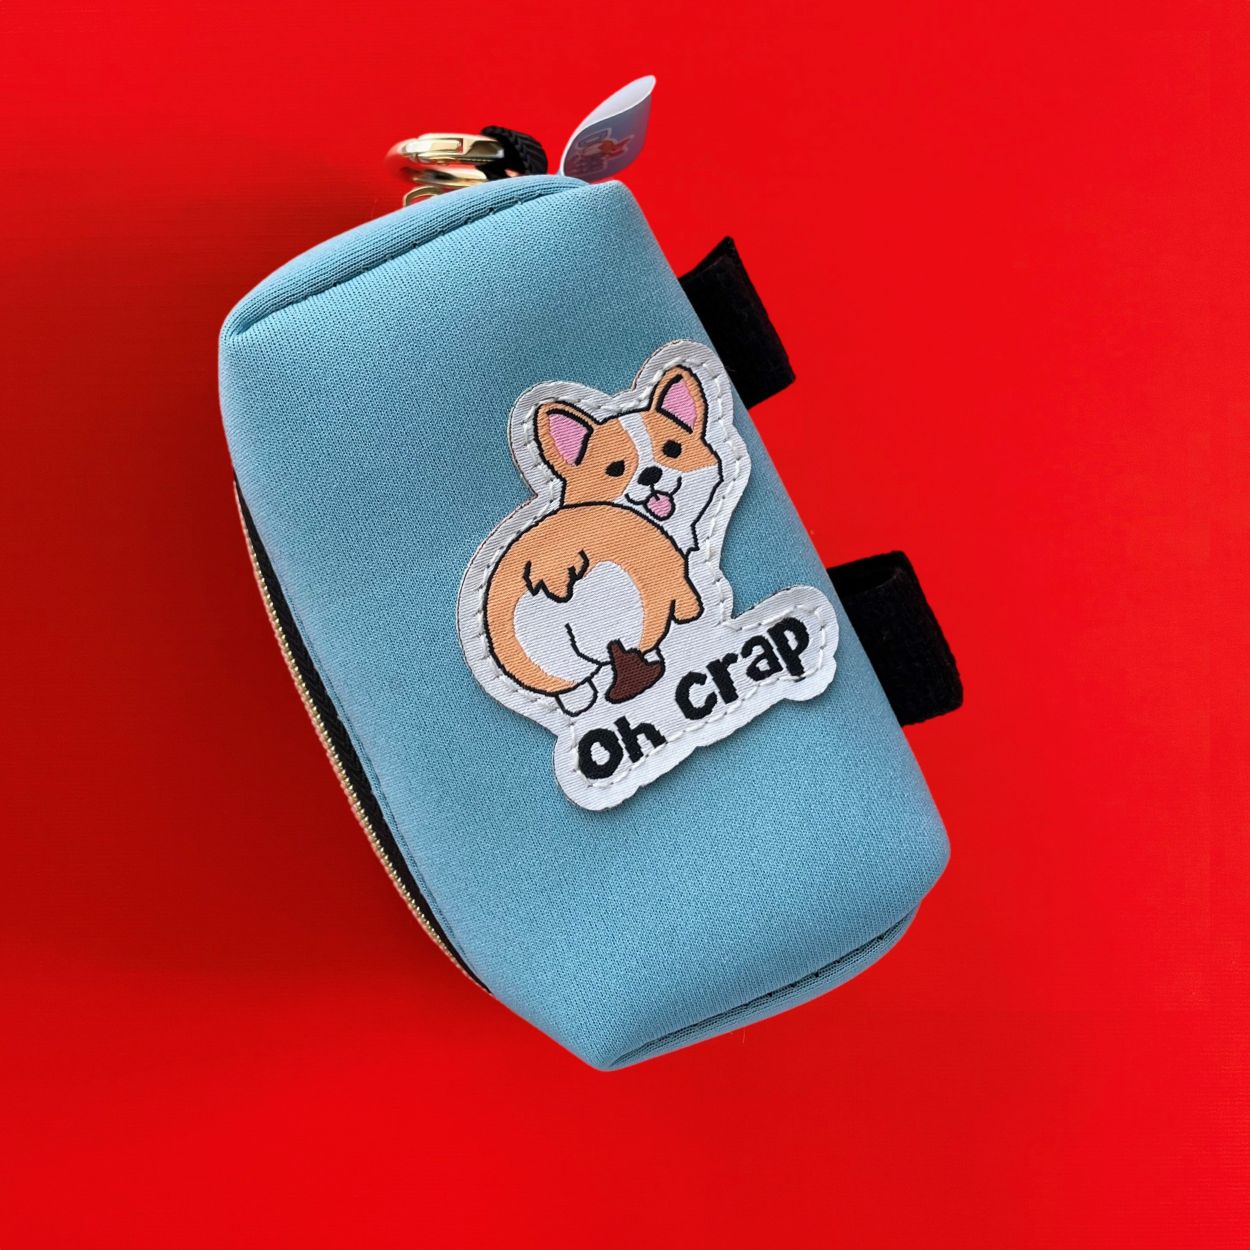 Poop Bag Dispenser - "Oh Crap" Red Background - Doggy Style Pet Accessories